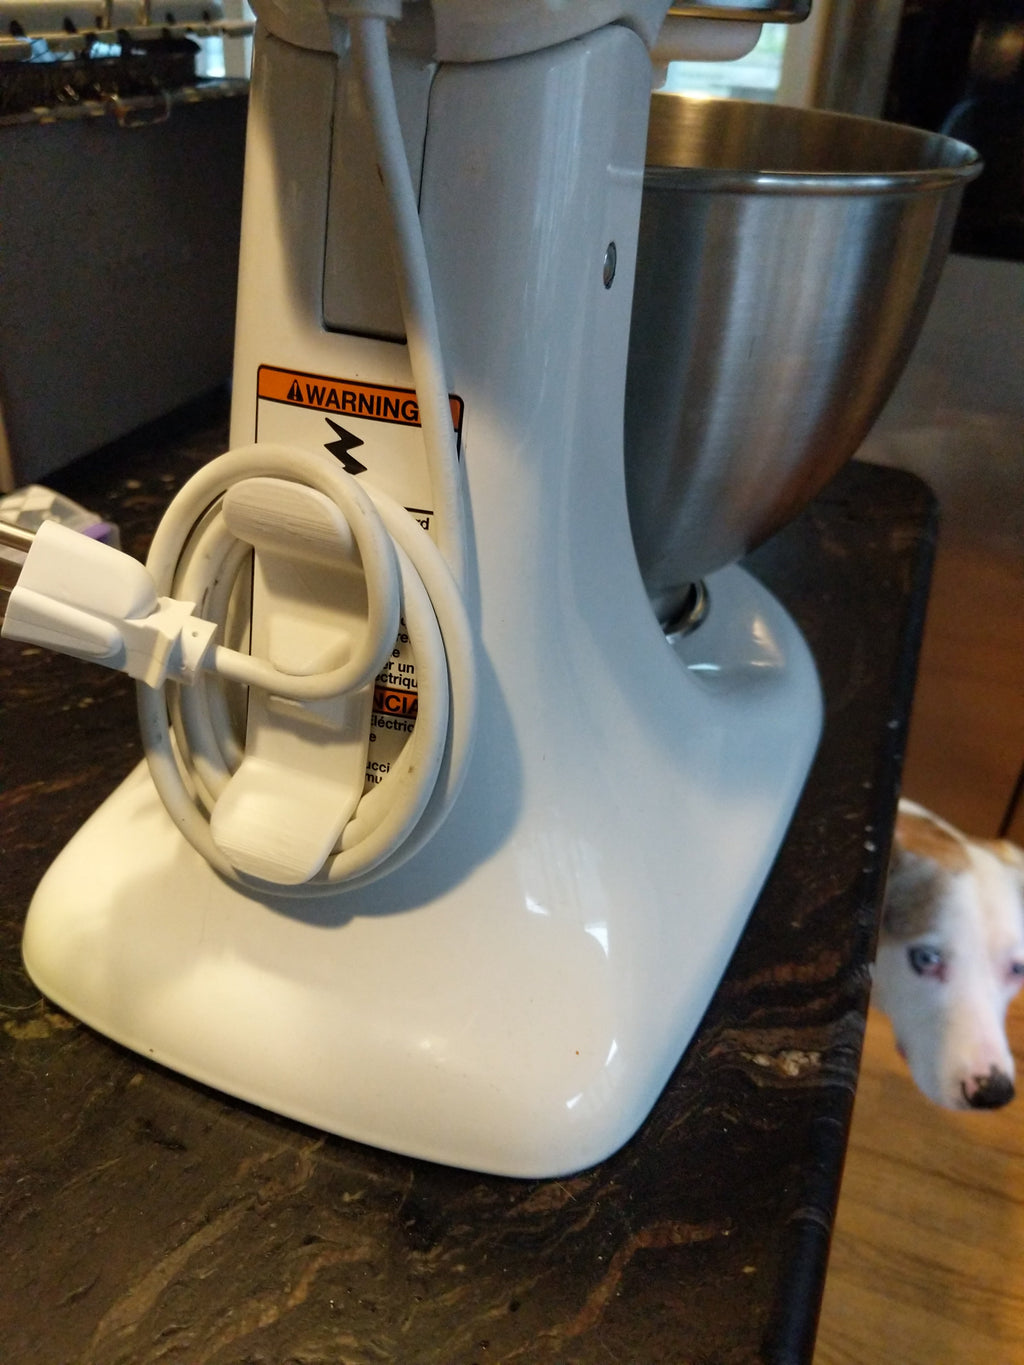 The Cord Wrapper Review - Stand Mixer Cord